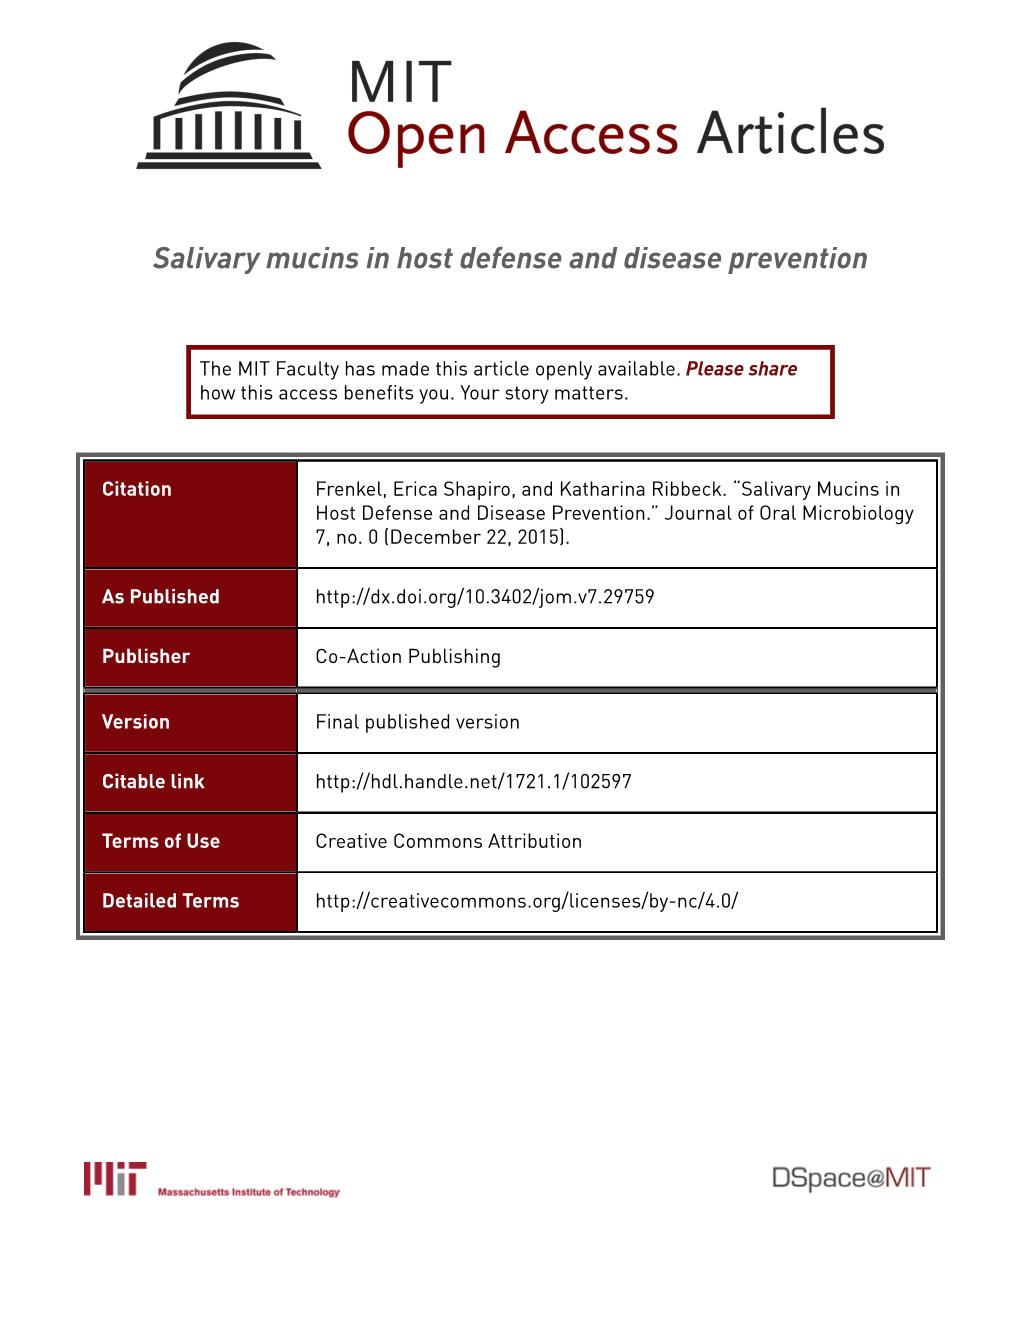 Salivary Mucins in Host Defense and Disease Prevention